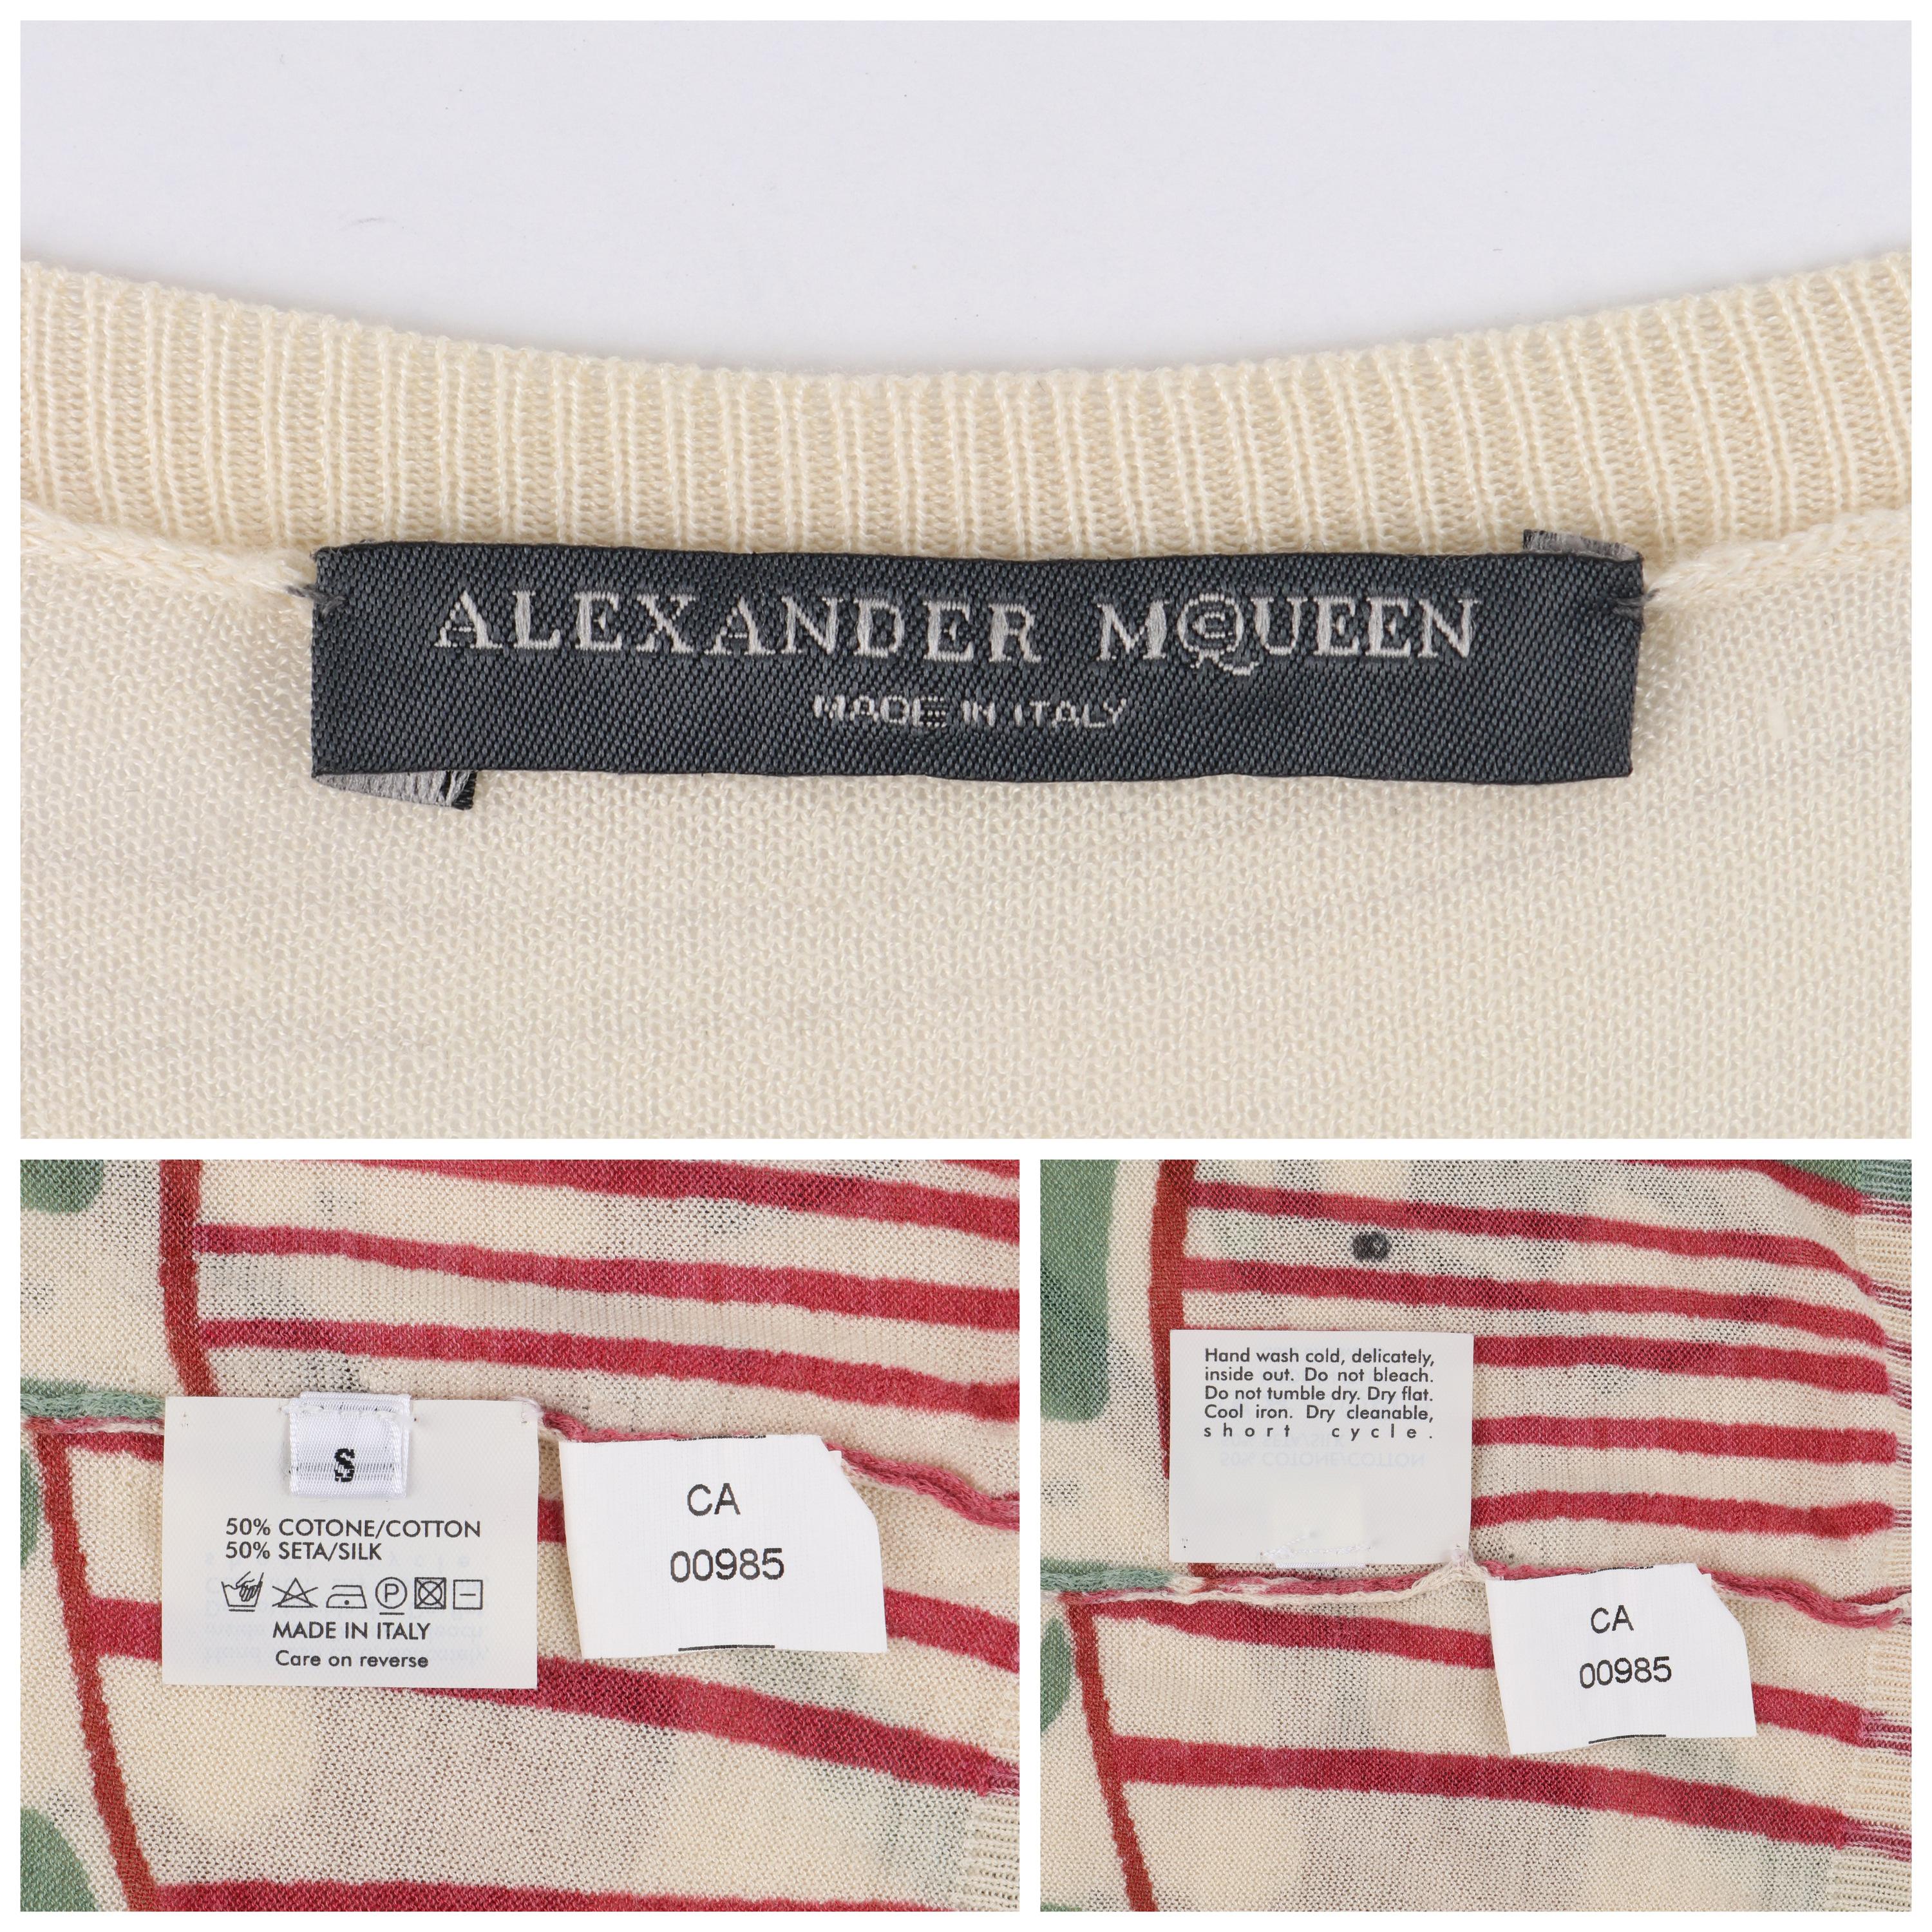 ALEXANDER McQUEEN S/S 2005 “It's Only a Game” Carousel Horse Sleeveless Knit Top 3